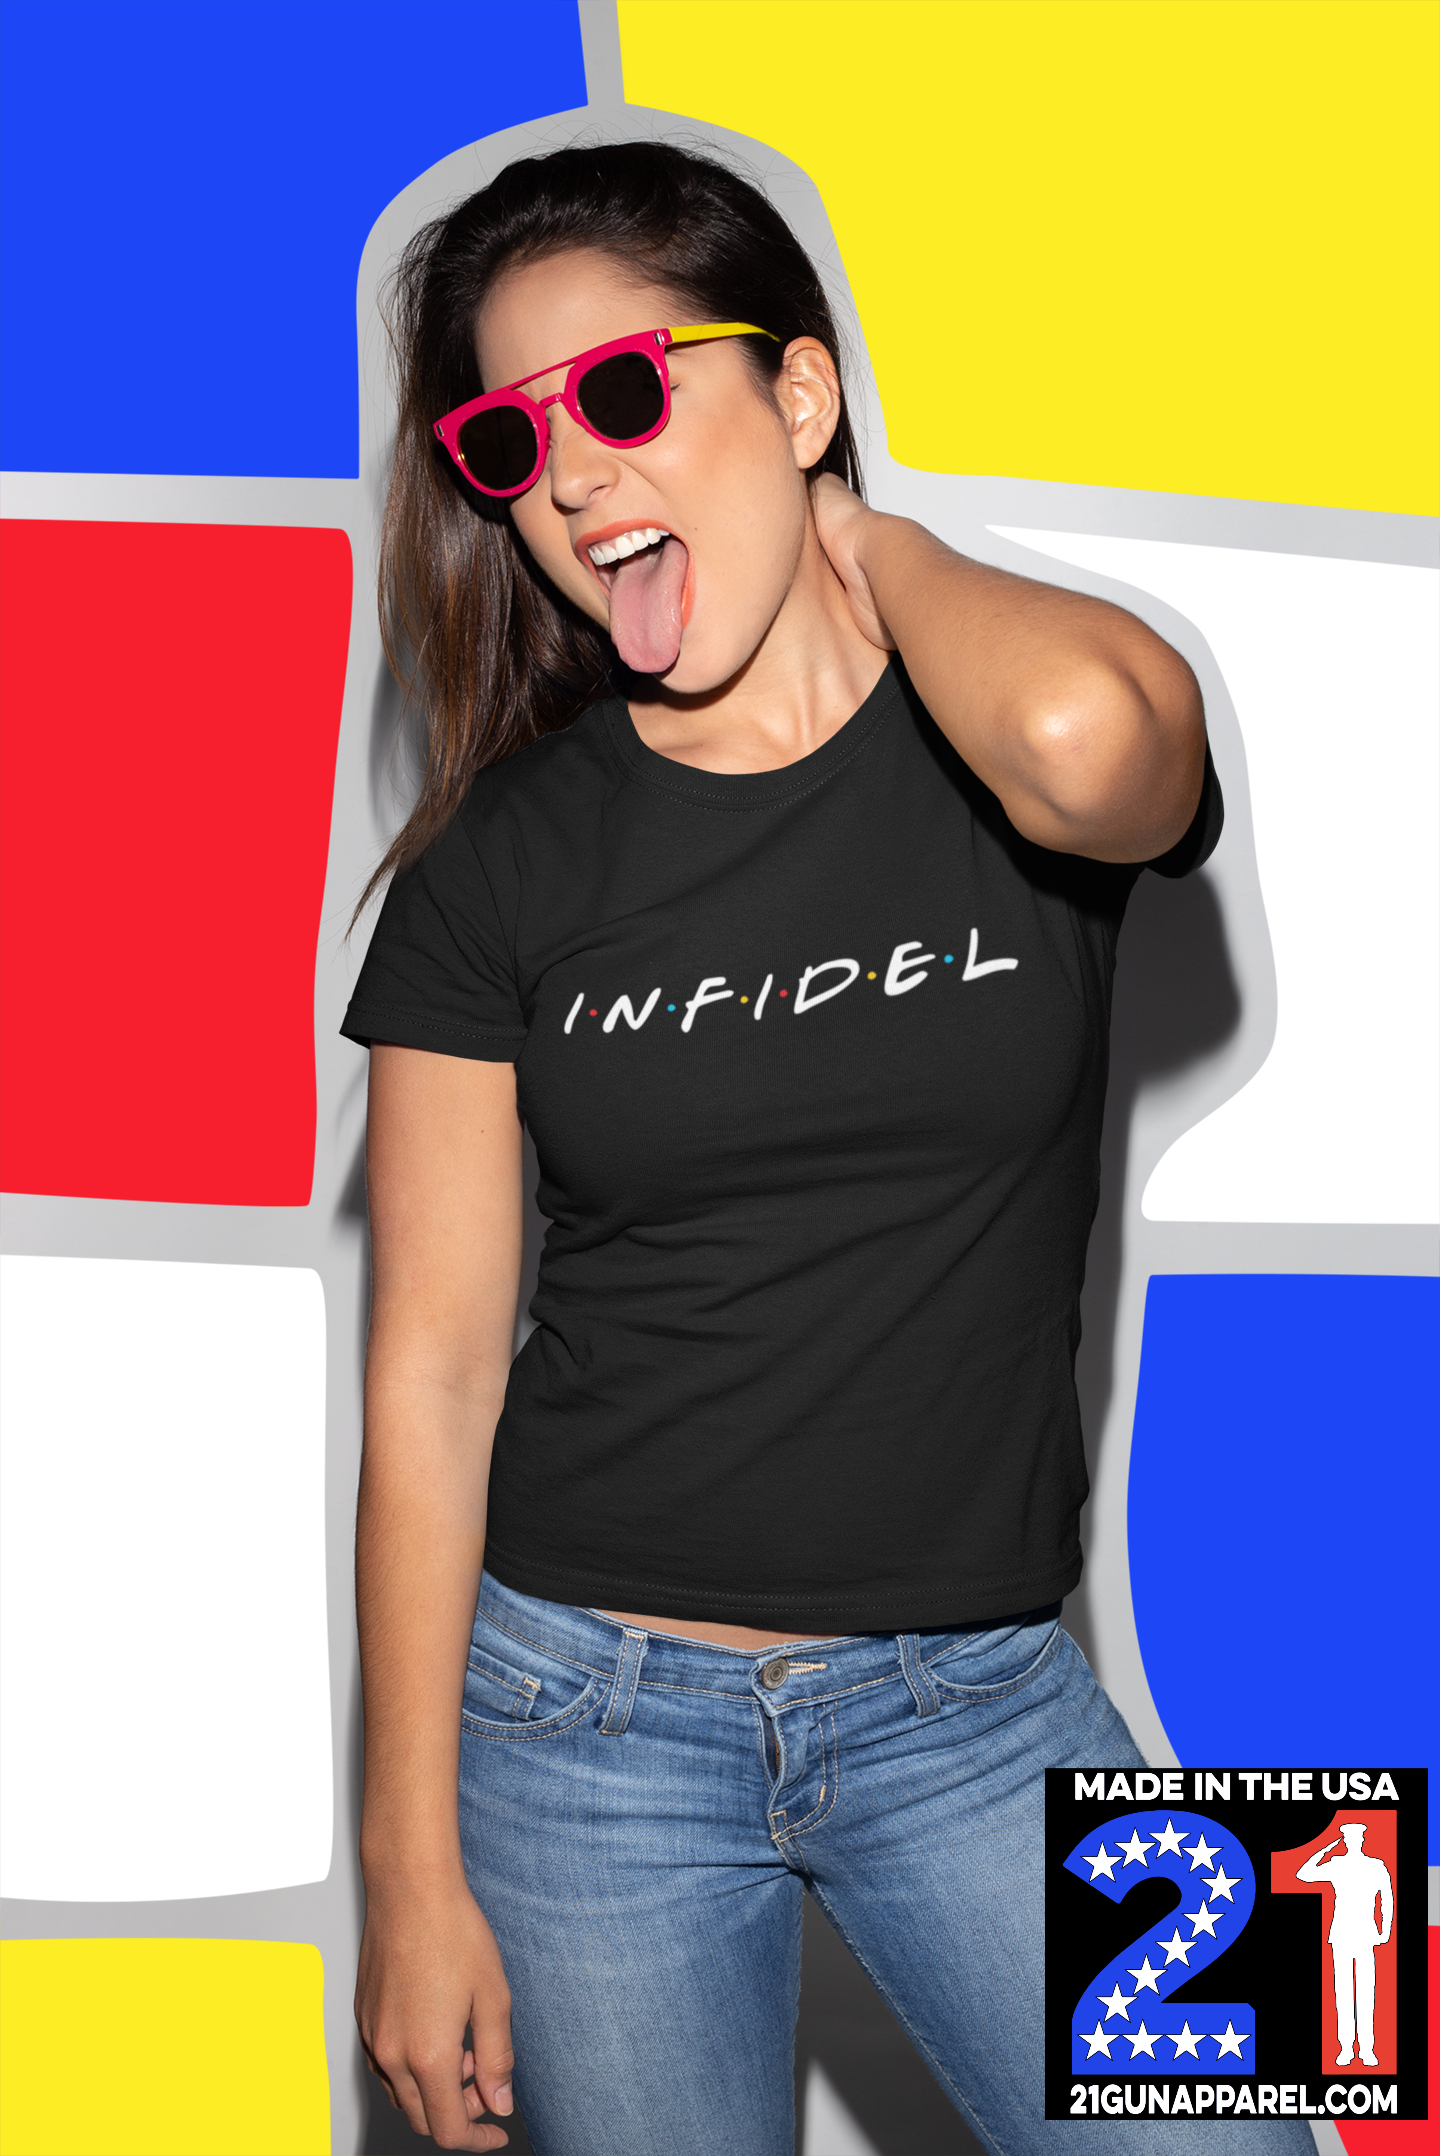 The One With The Infidel T-shirt Ladies Crew Neck Short Sleeve